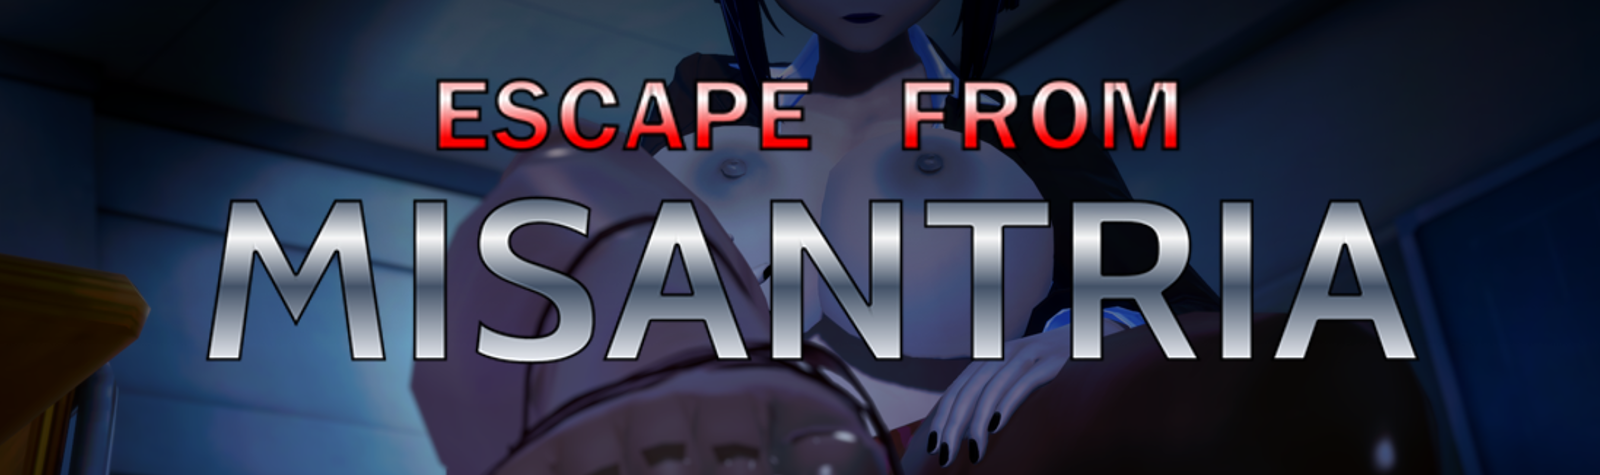 Escape from Misantria1.png